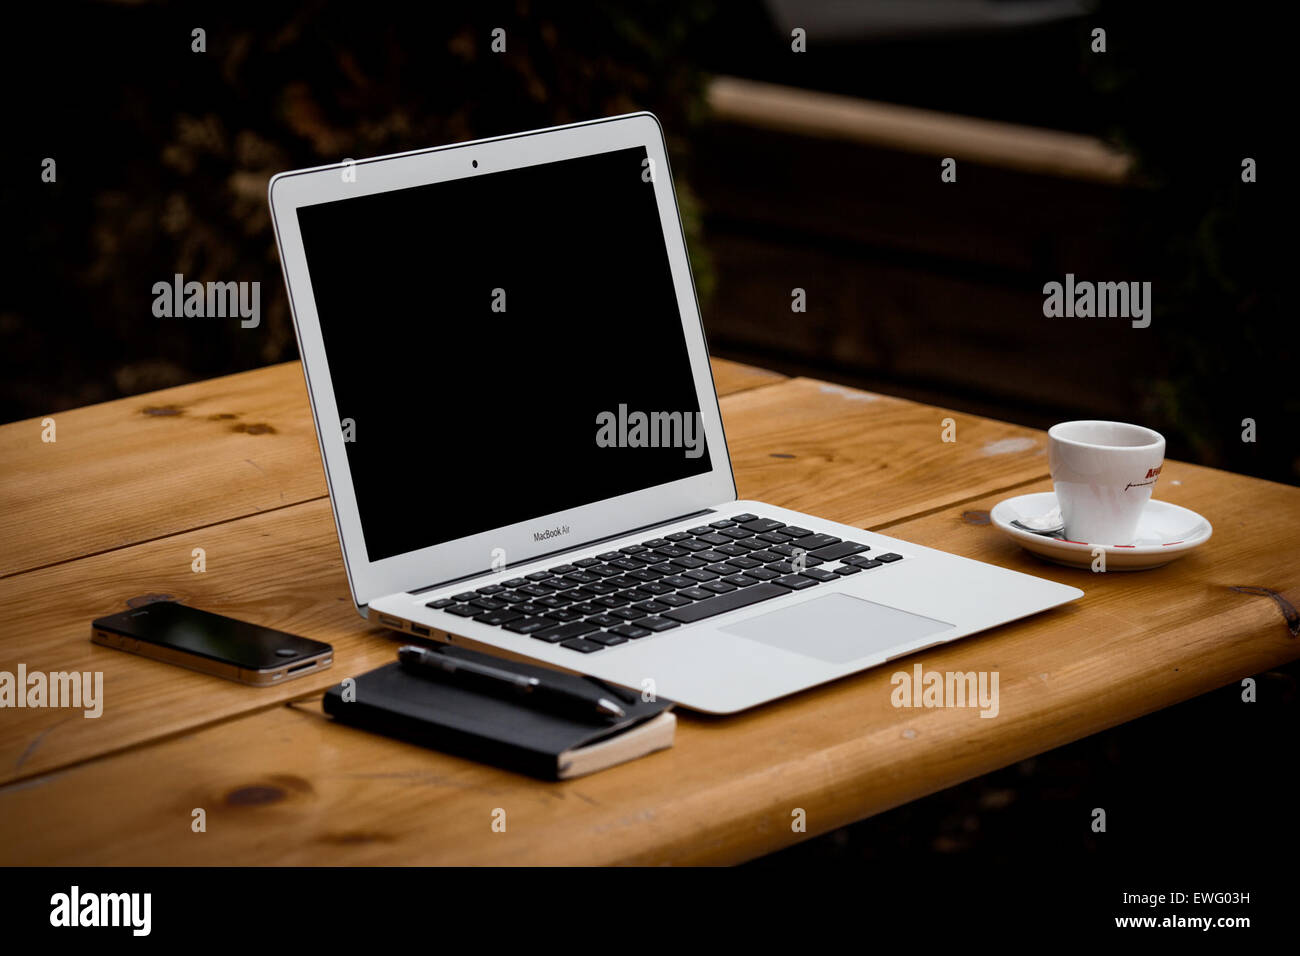 Apple Macbook Air on Wood Tabletop with Espresso Cup, Notepad, Stock Photo